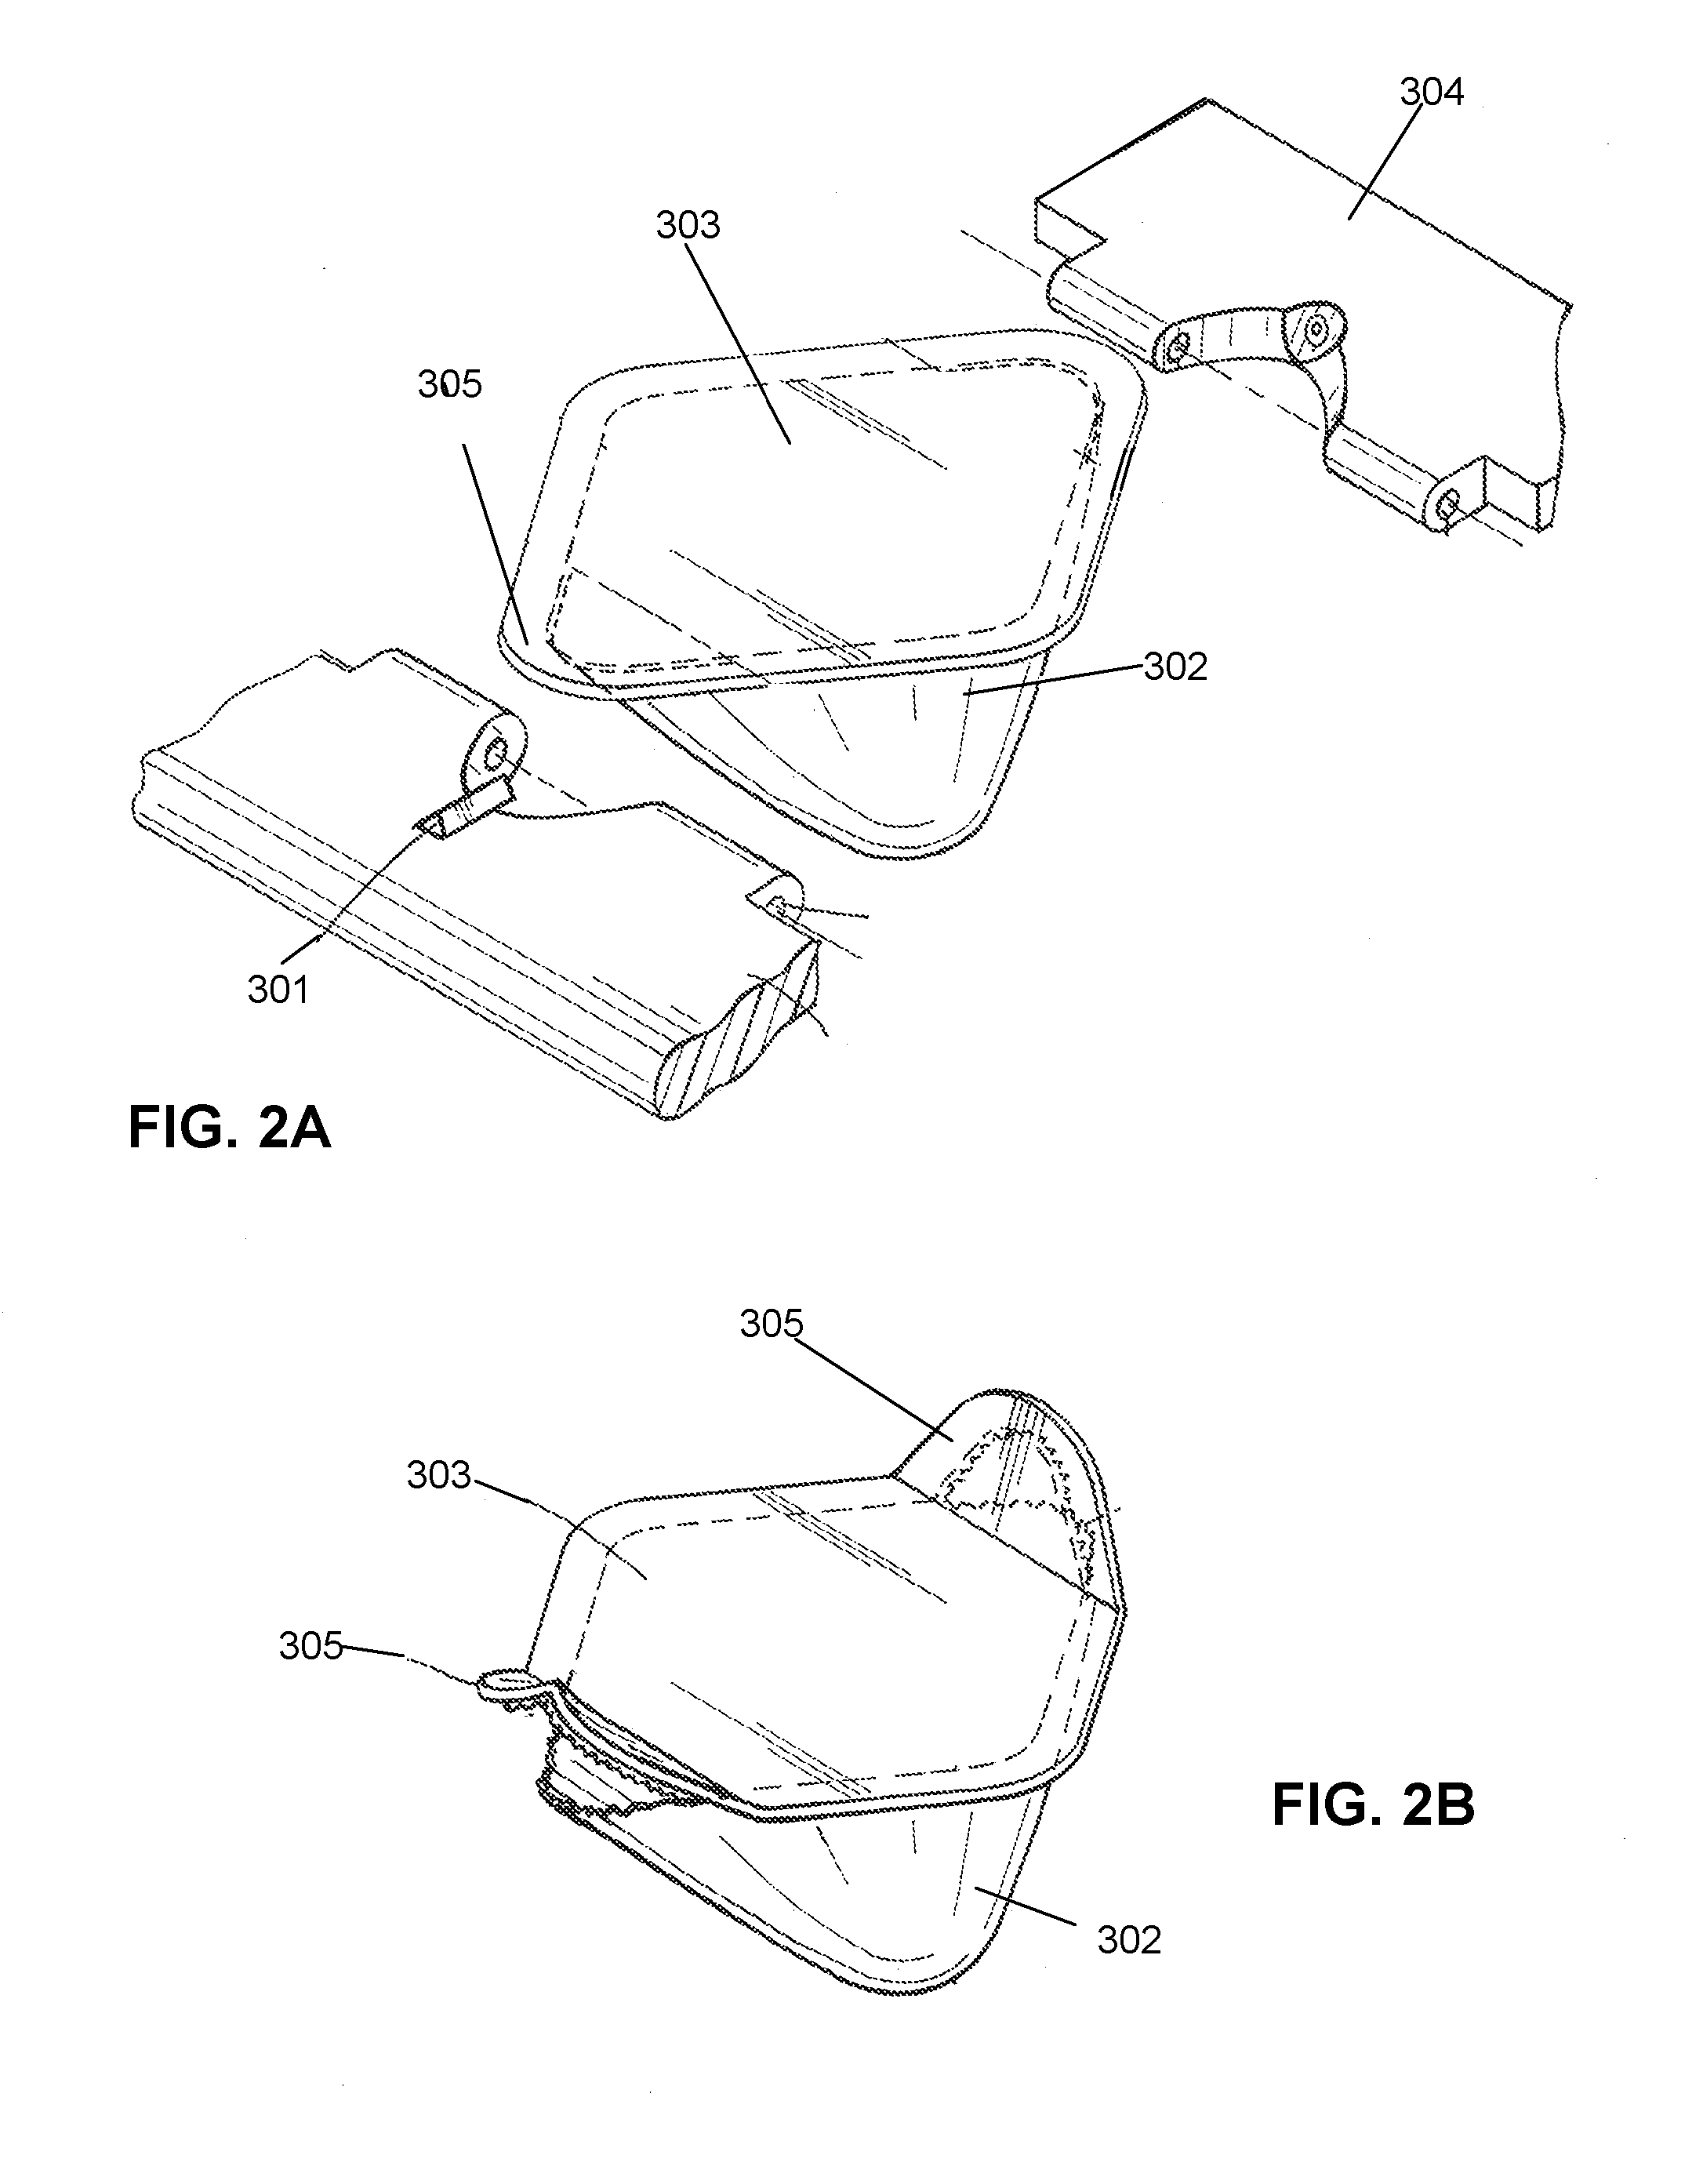 Capsule-Based System for Preparing and Dispensing a Beverage